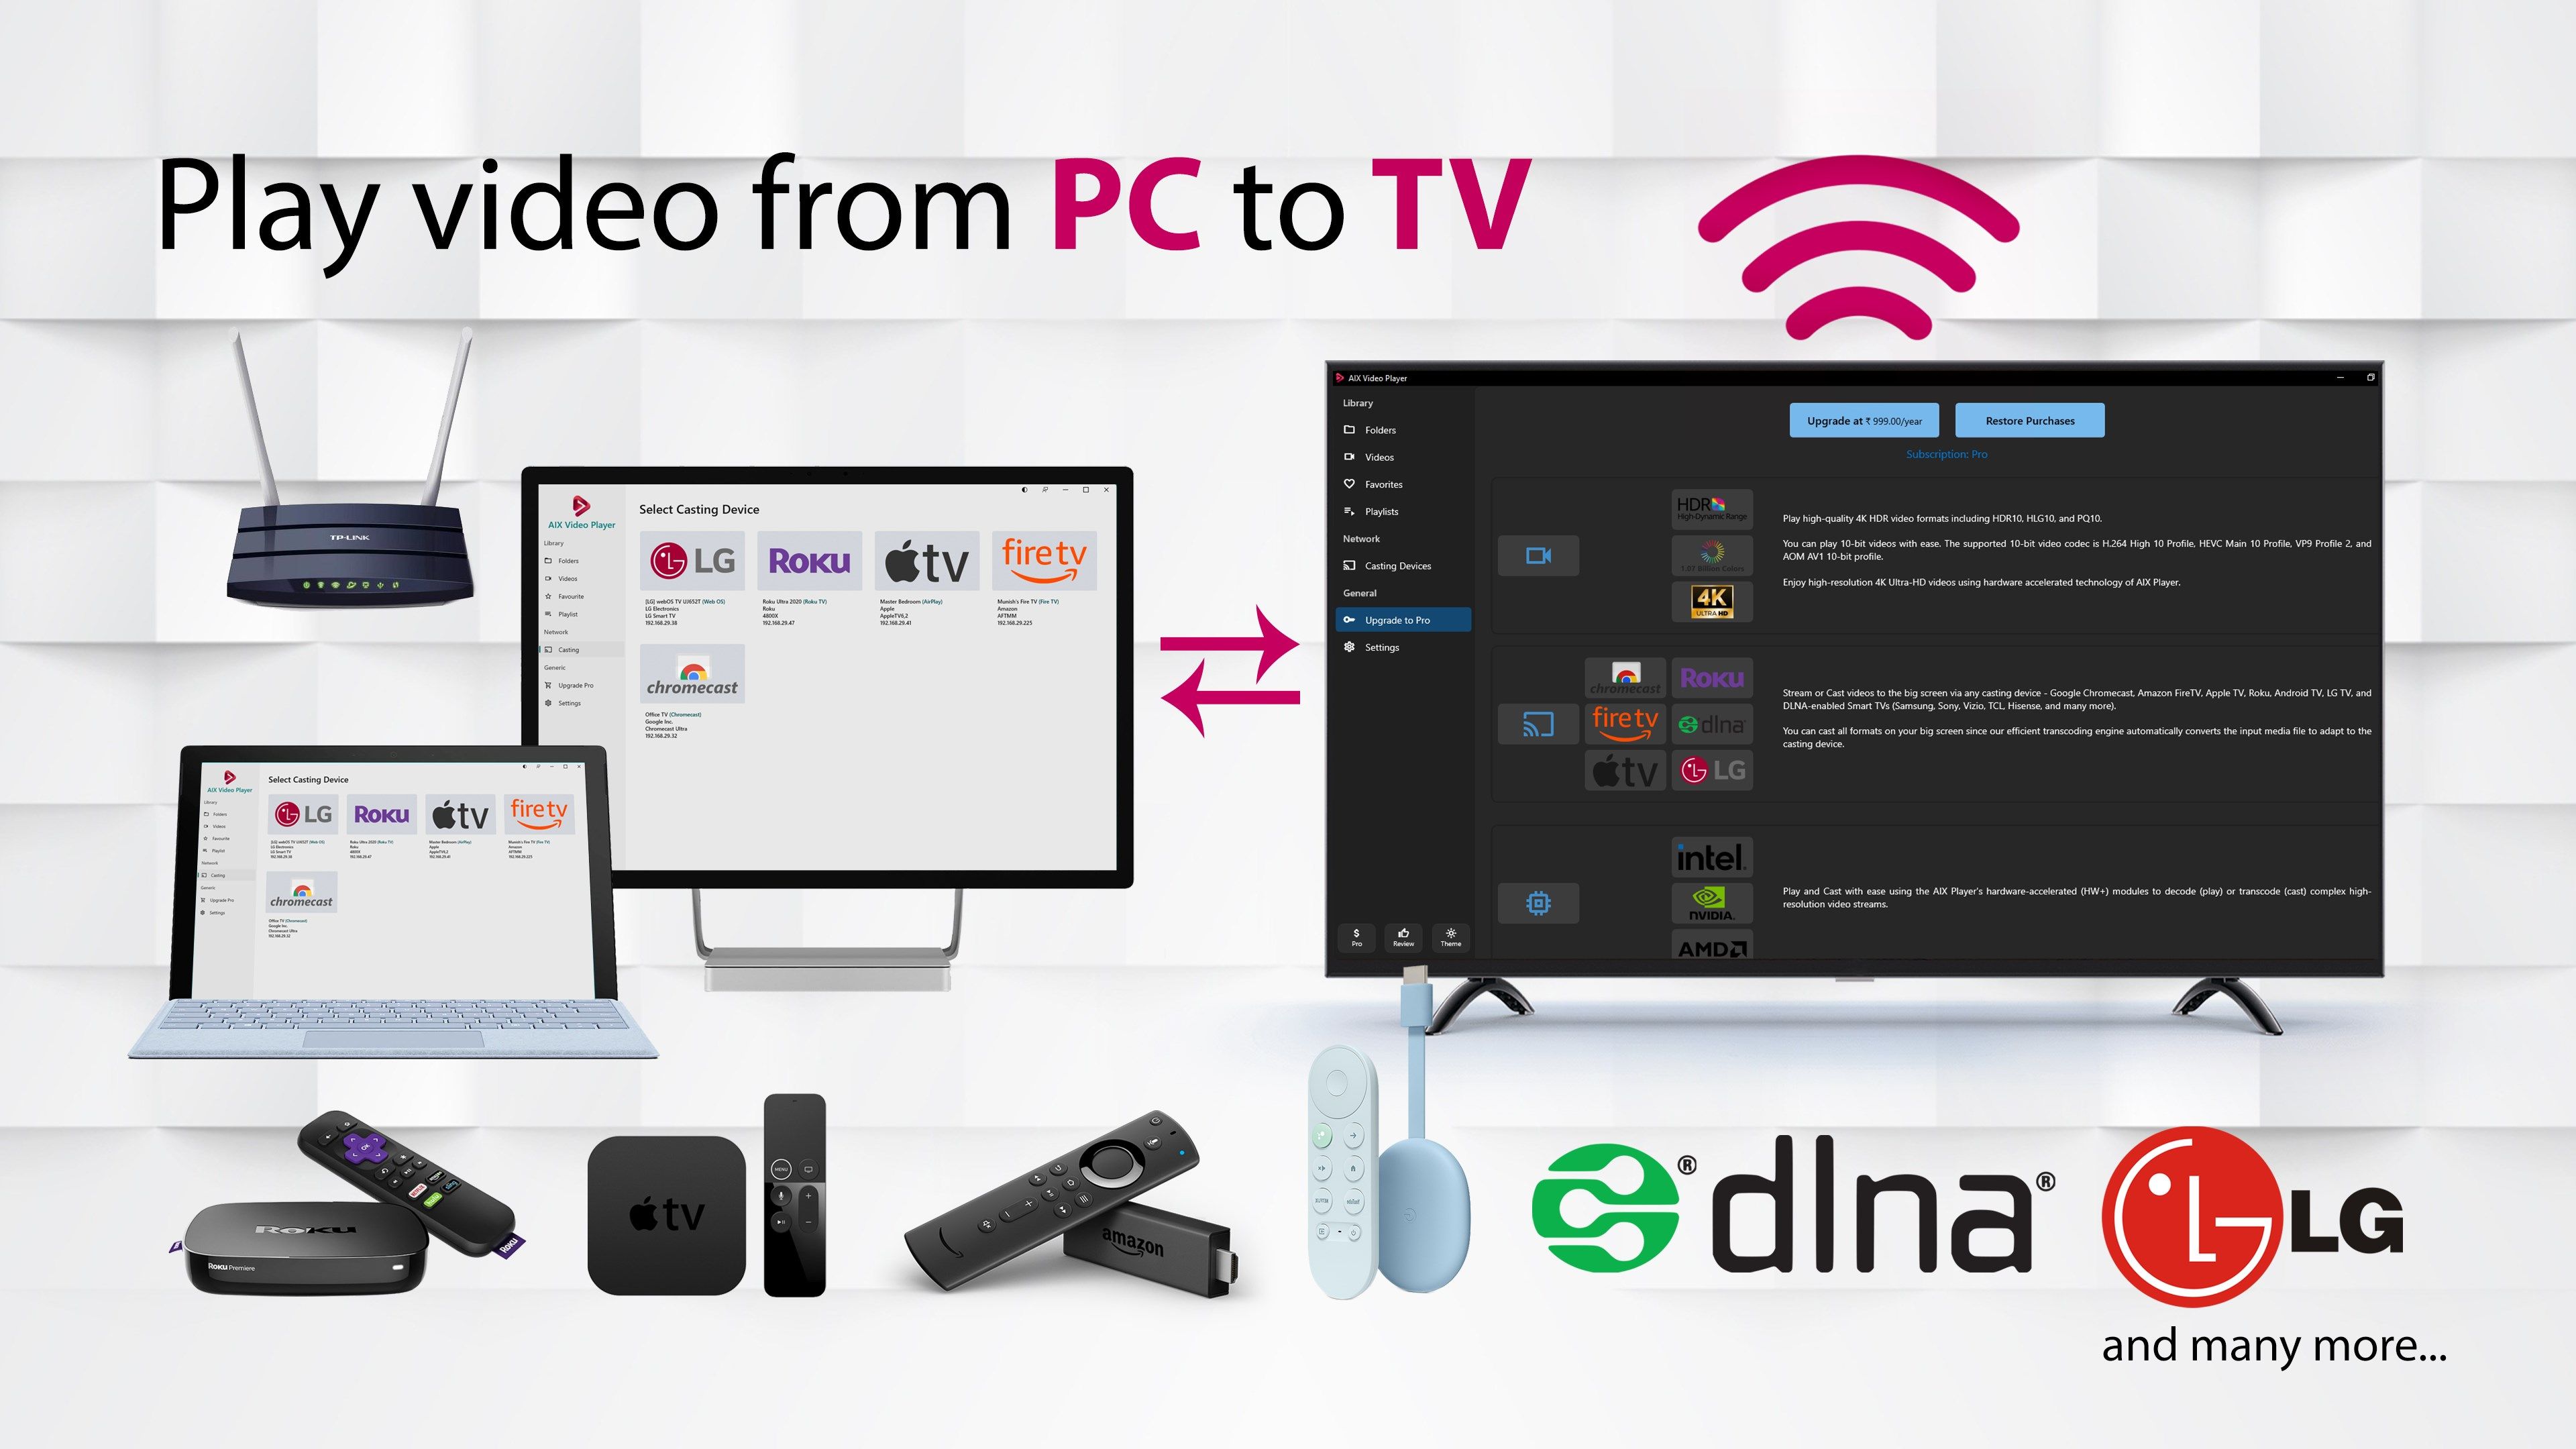 Video Casting to Chromecast, Roku, Fire TV, Apple TV, Android TV, Smart TV, and DLNA-enabled Smart TV